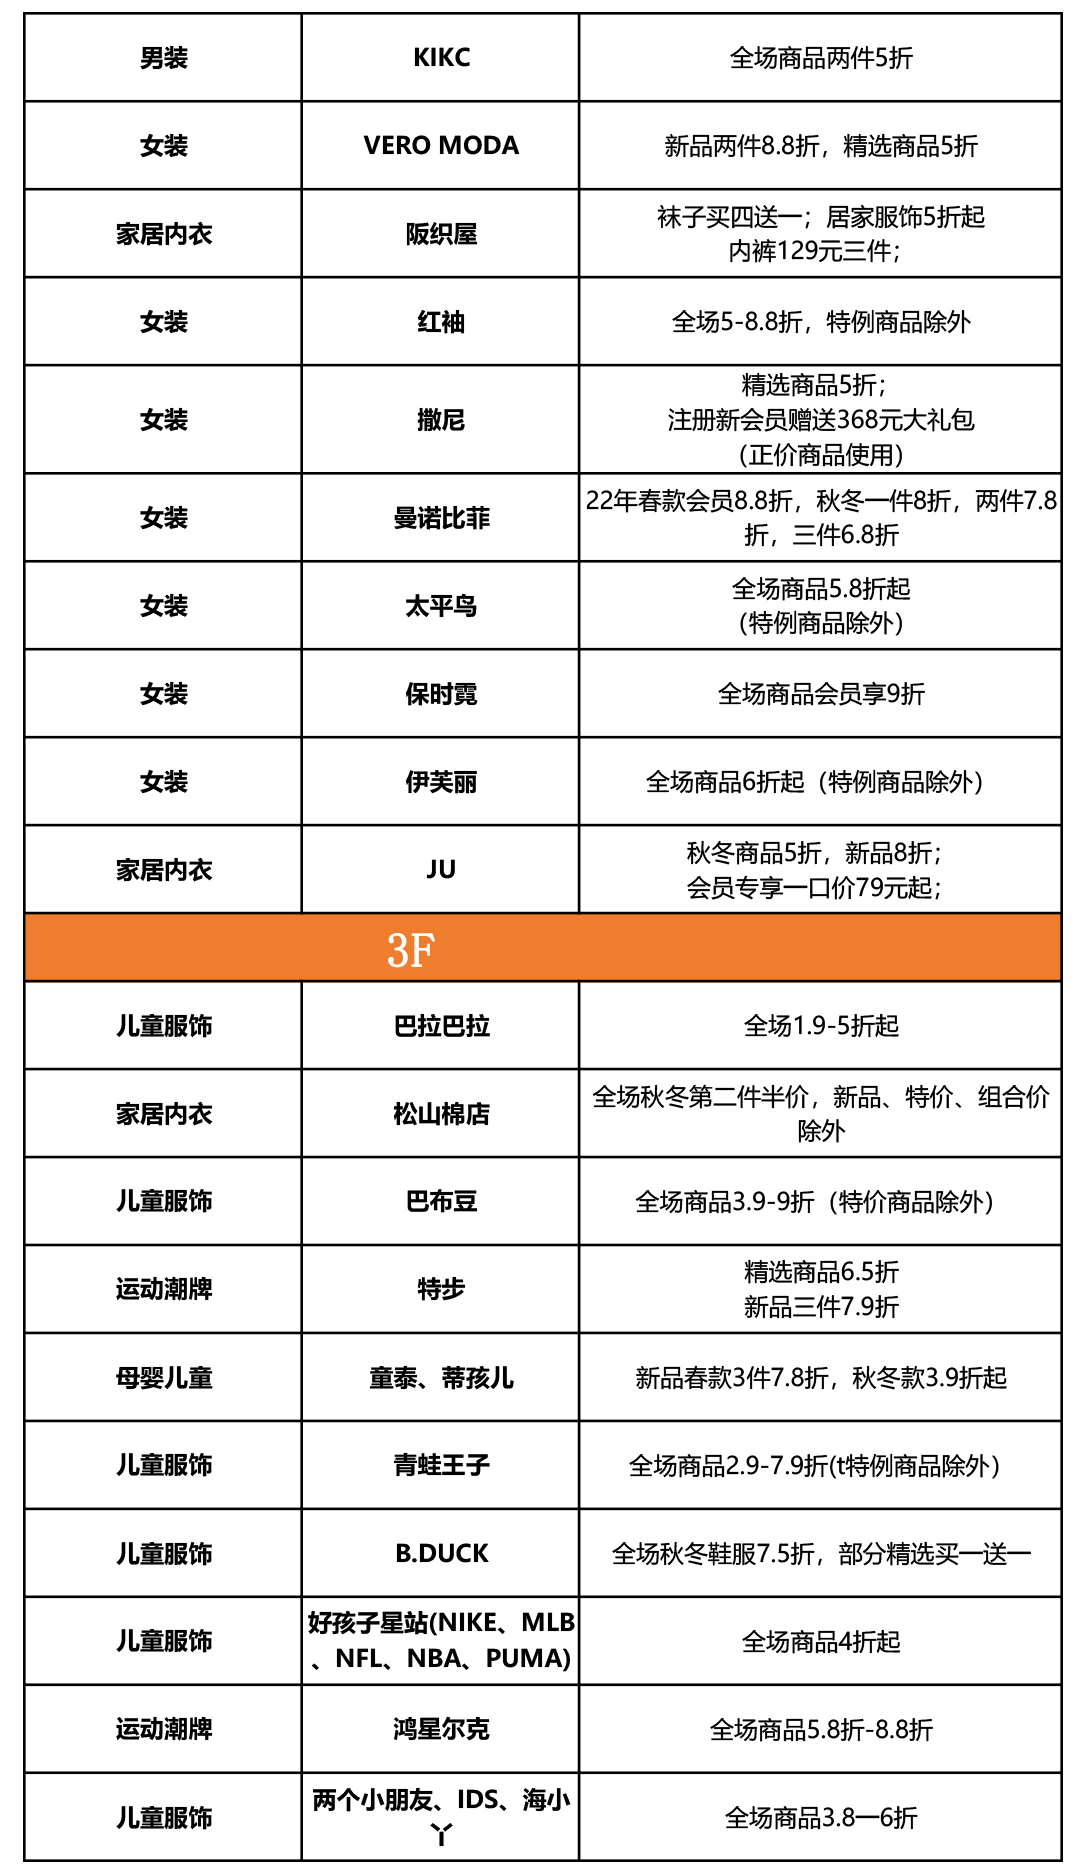 ssis362小宵虎南（小宵虎南ssis最新）